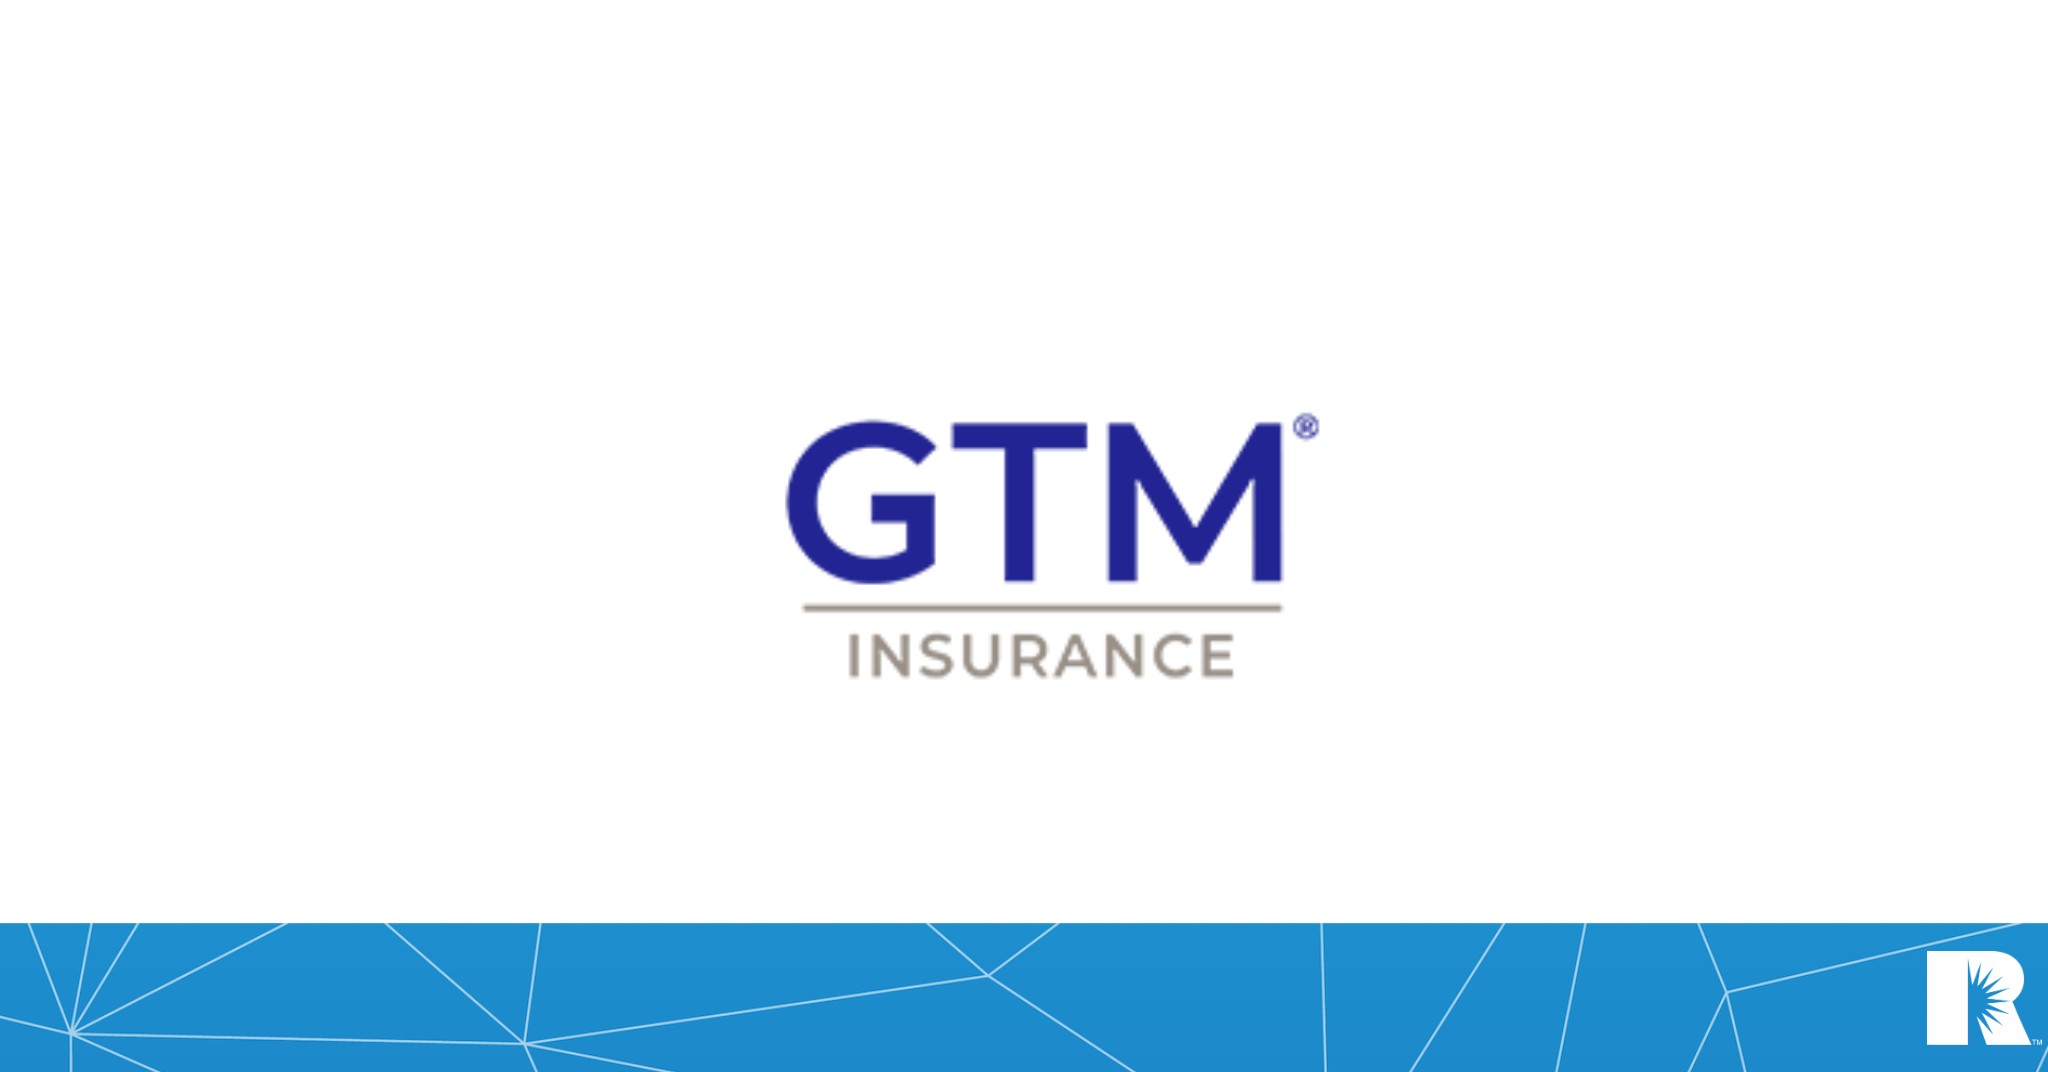 The logo for the GTM Insurance Agency.